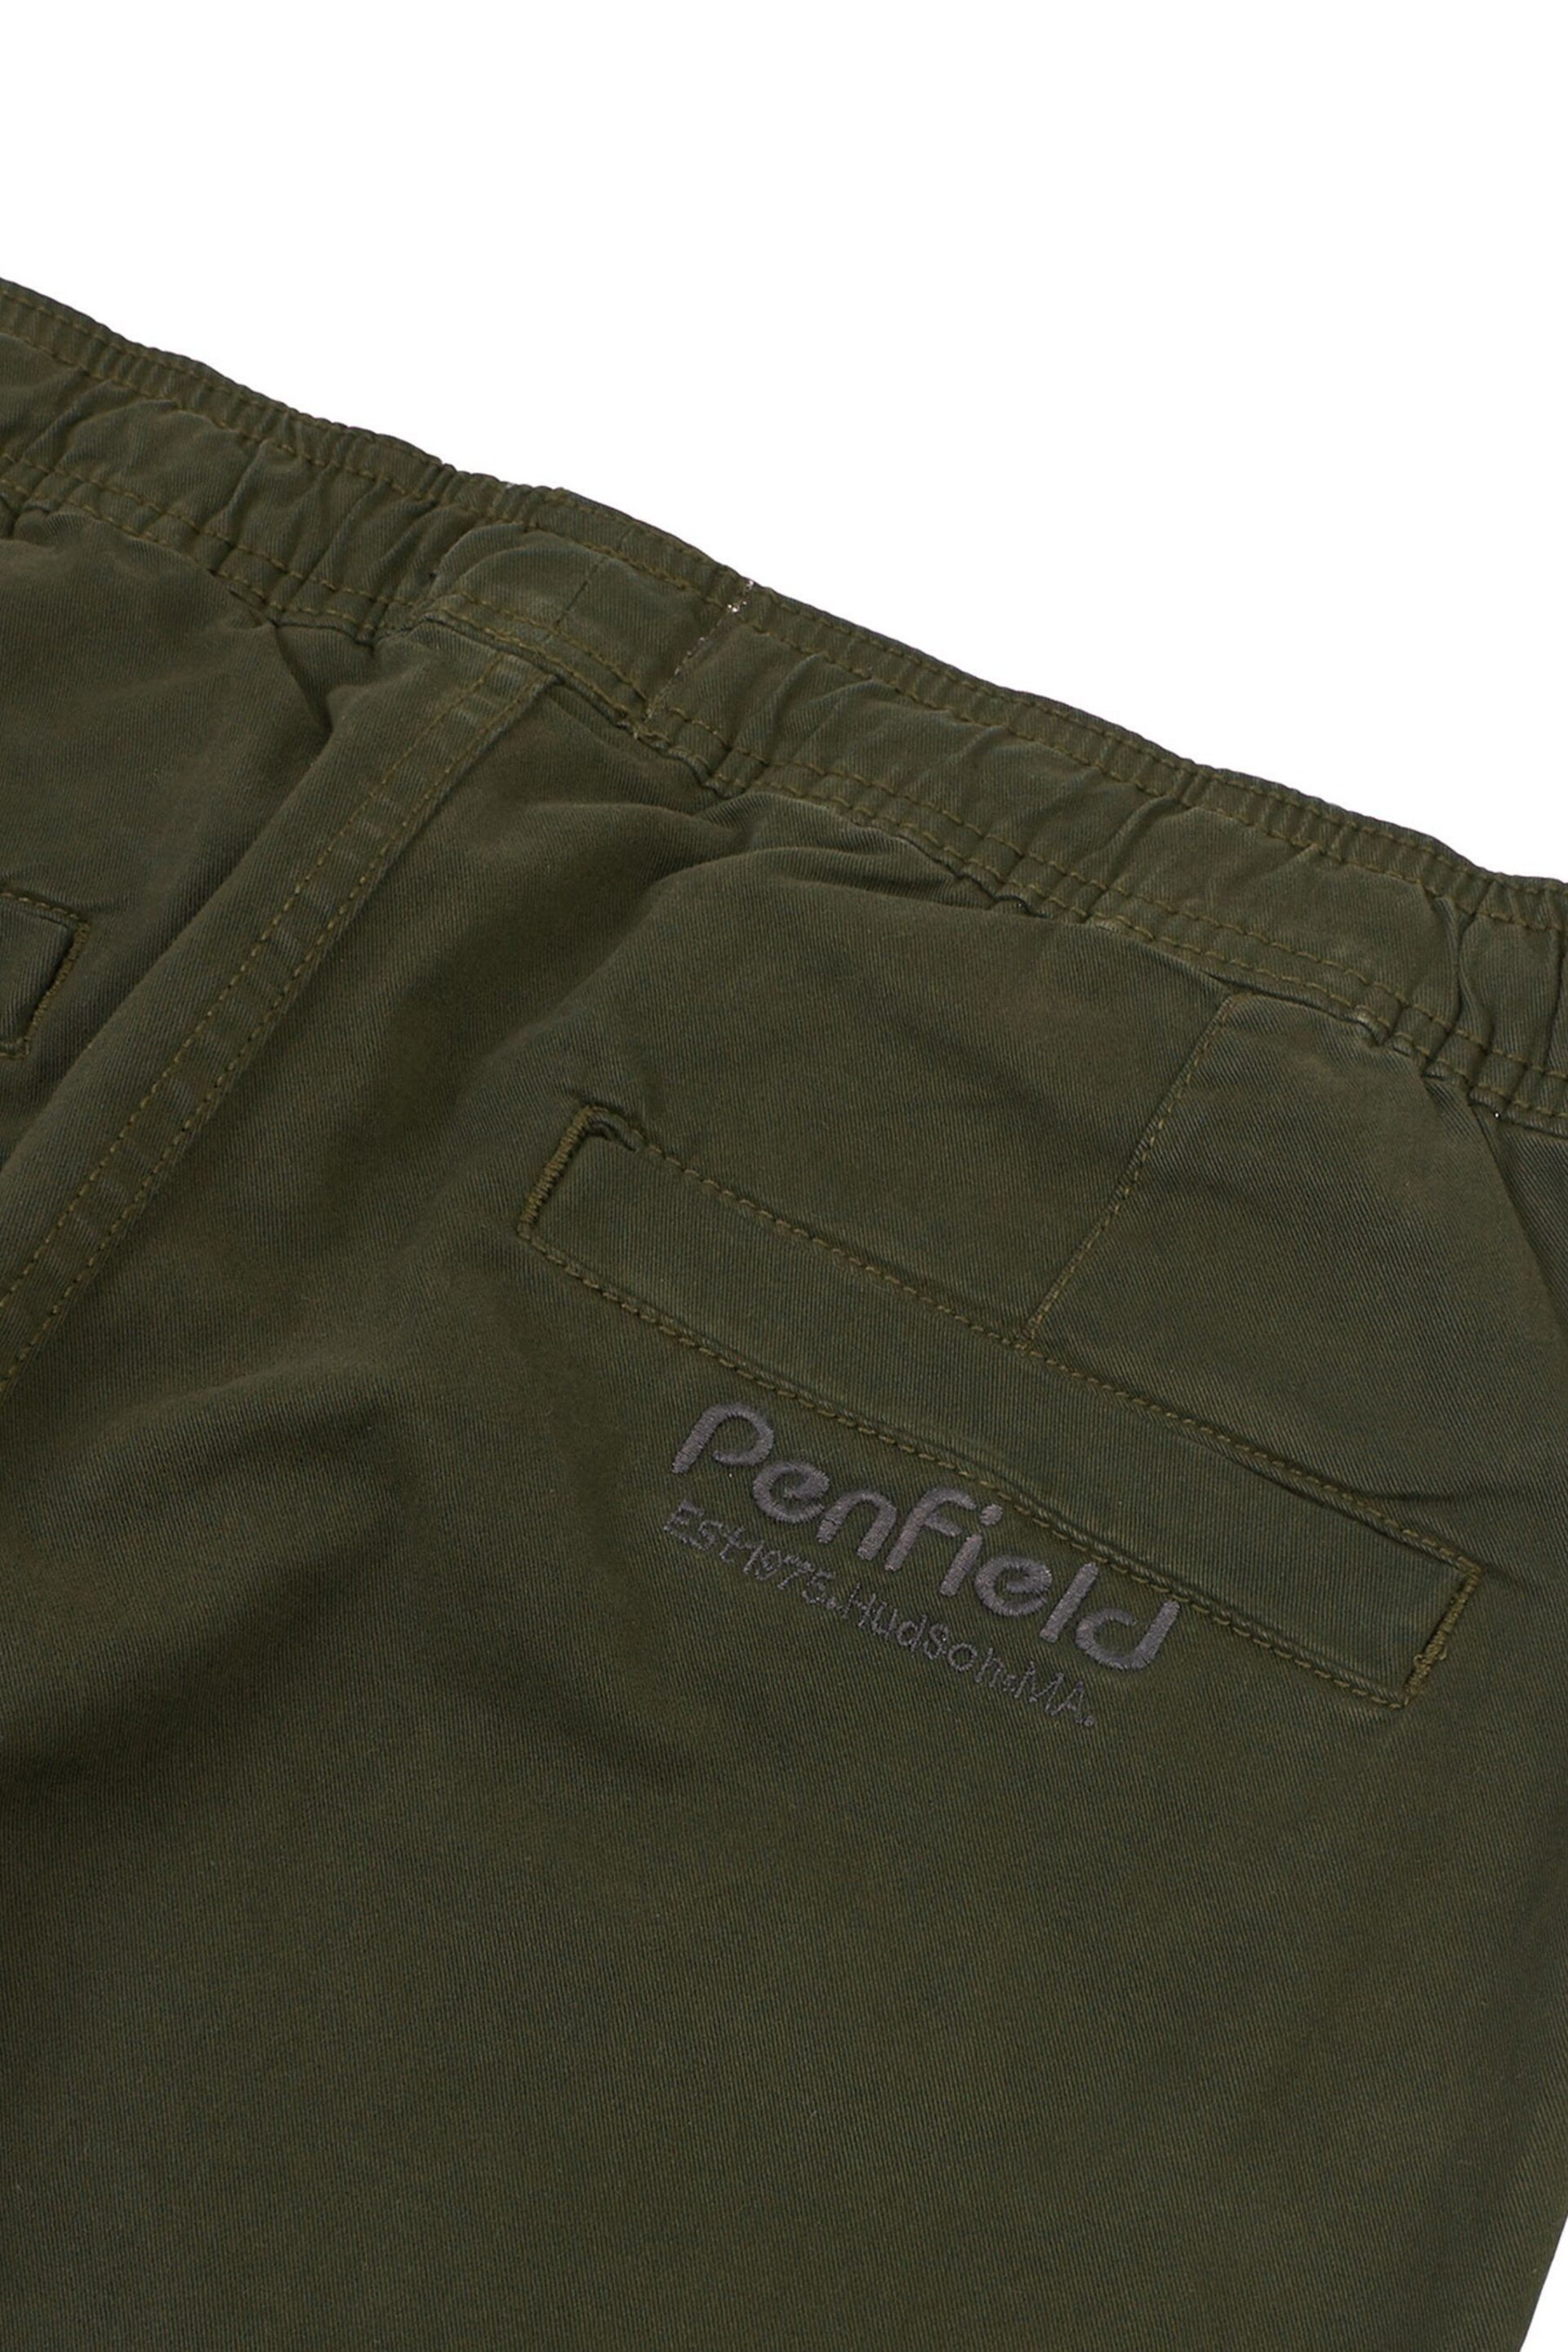 Penfield Green Hudson Script Elasticated Waist Trousers - Image 7 of 7